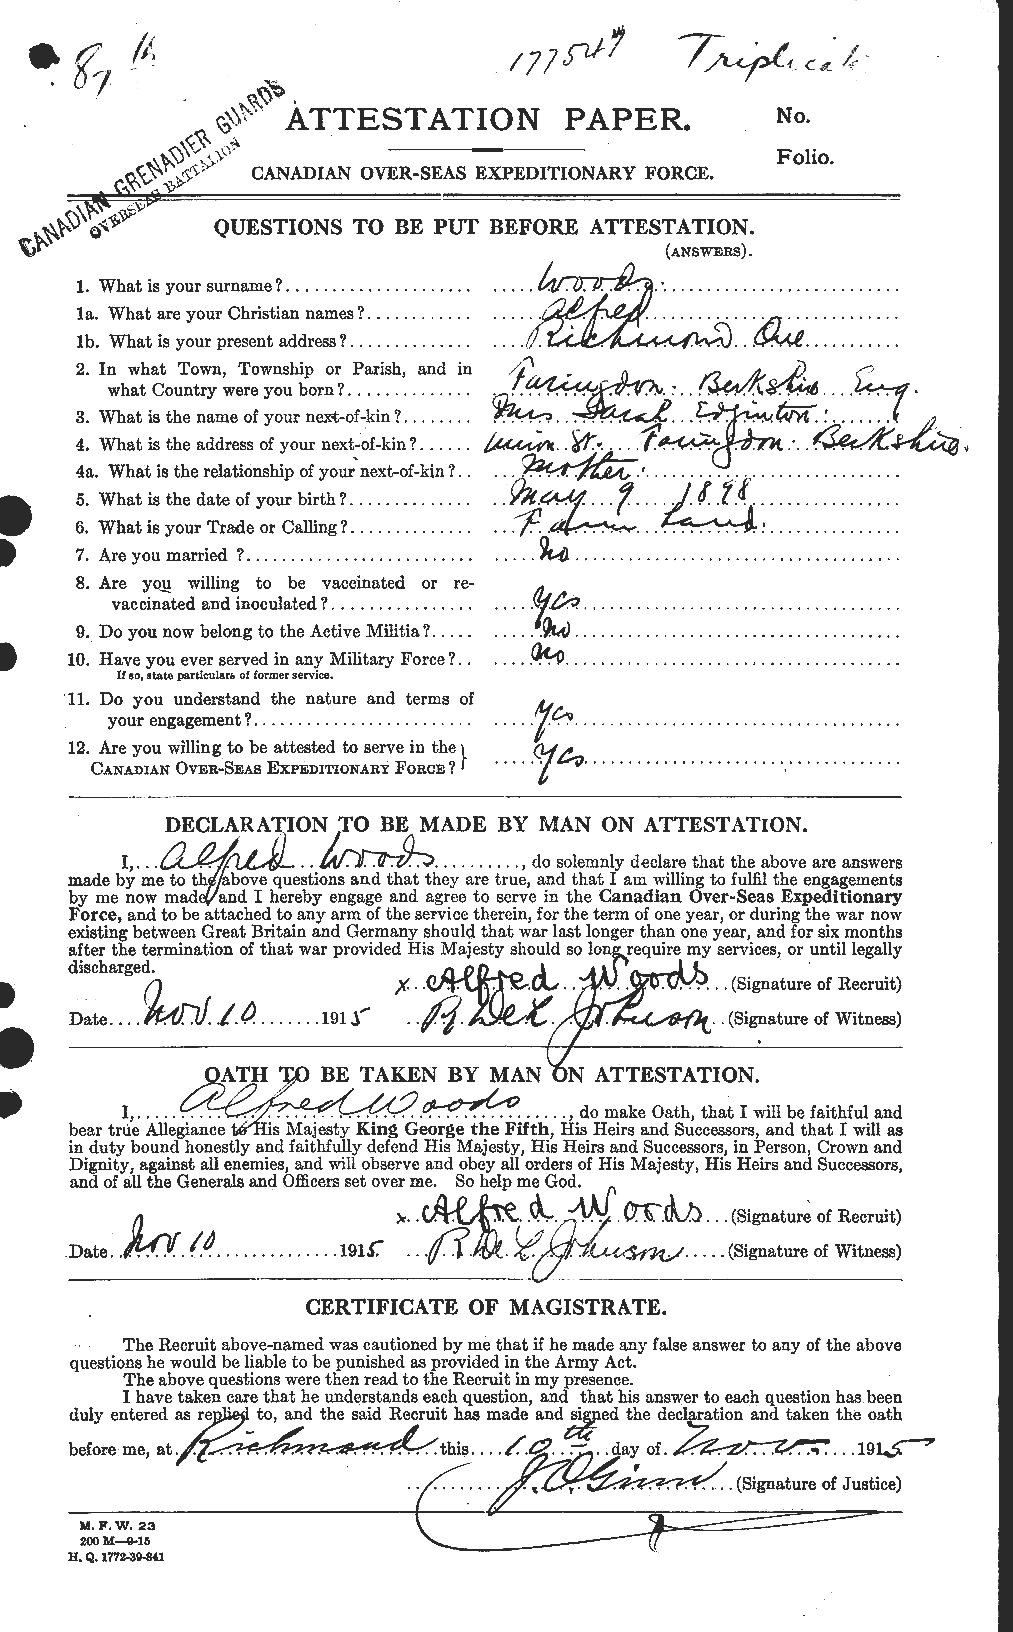 Attestation record: Alfred Woods